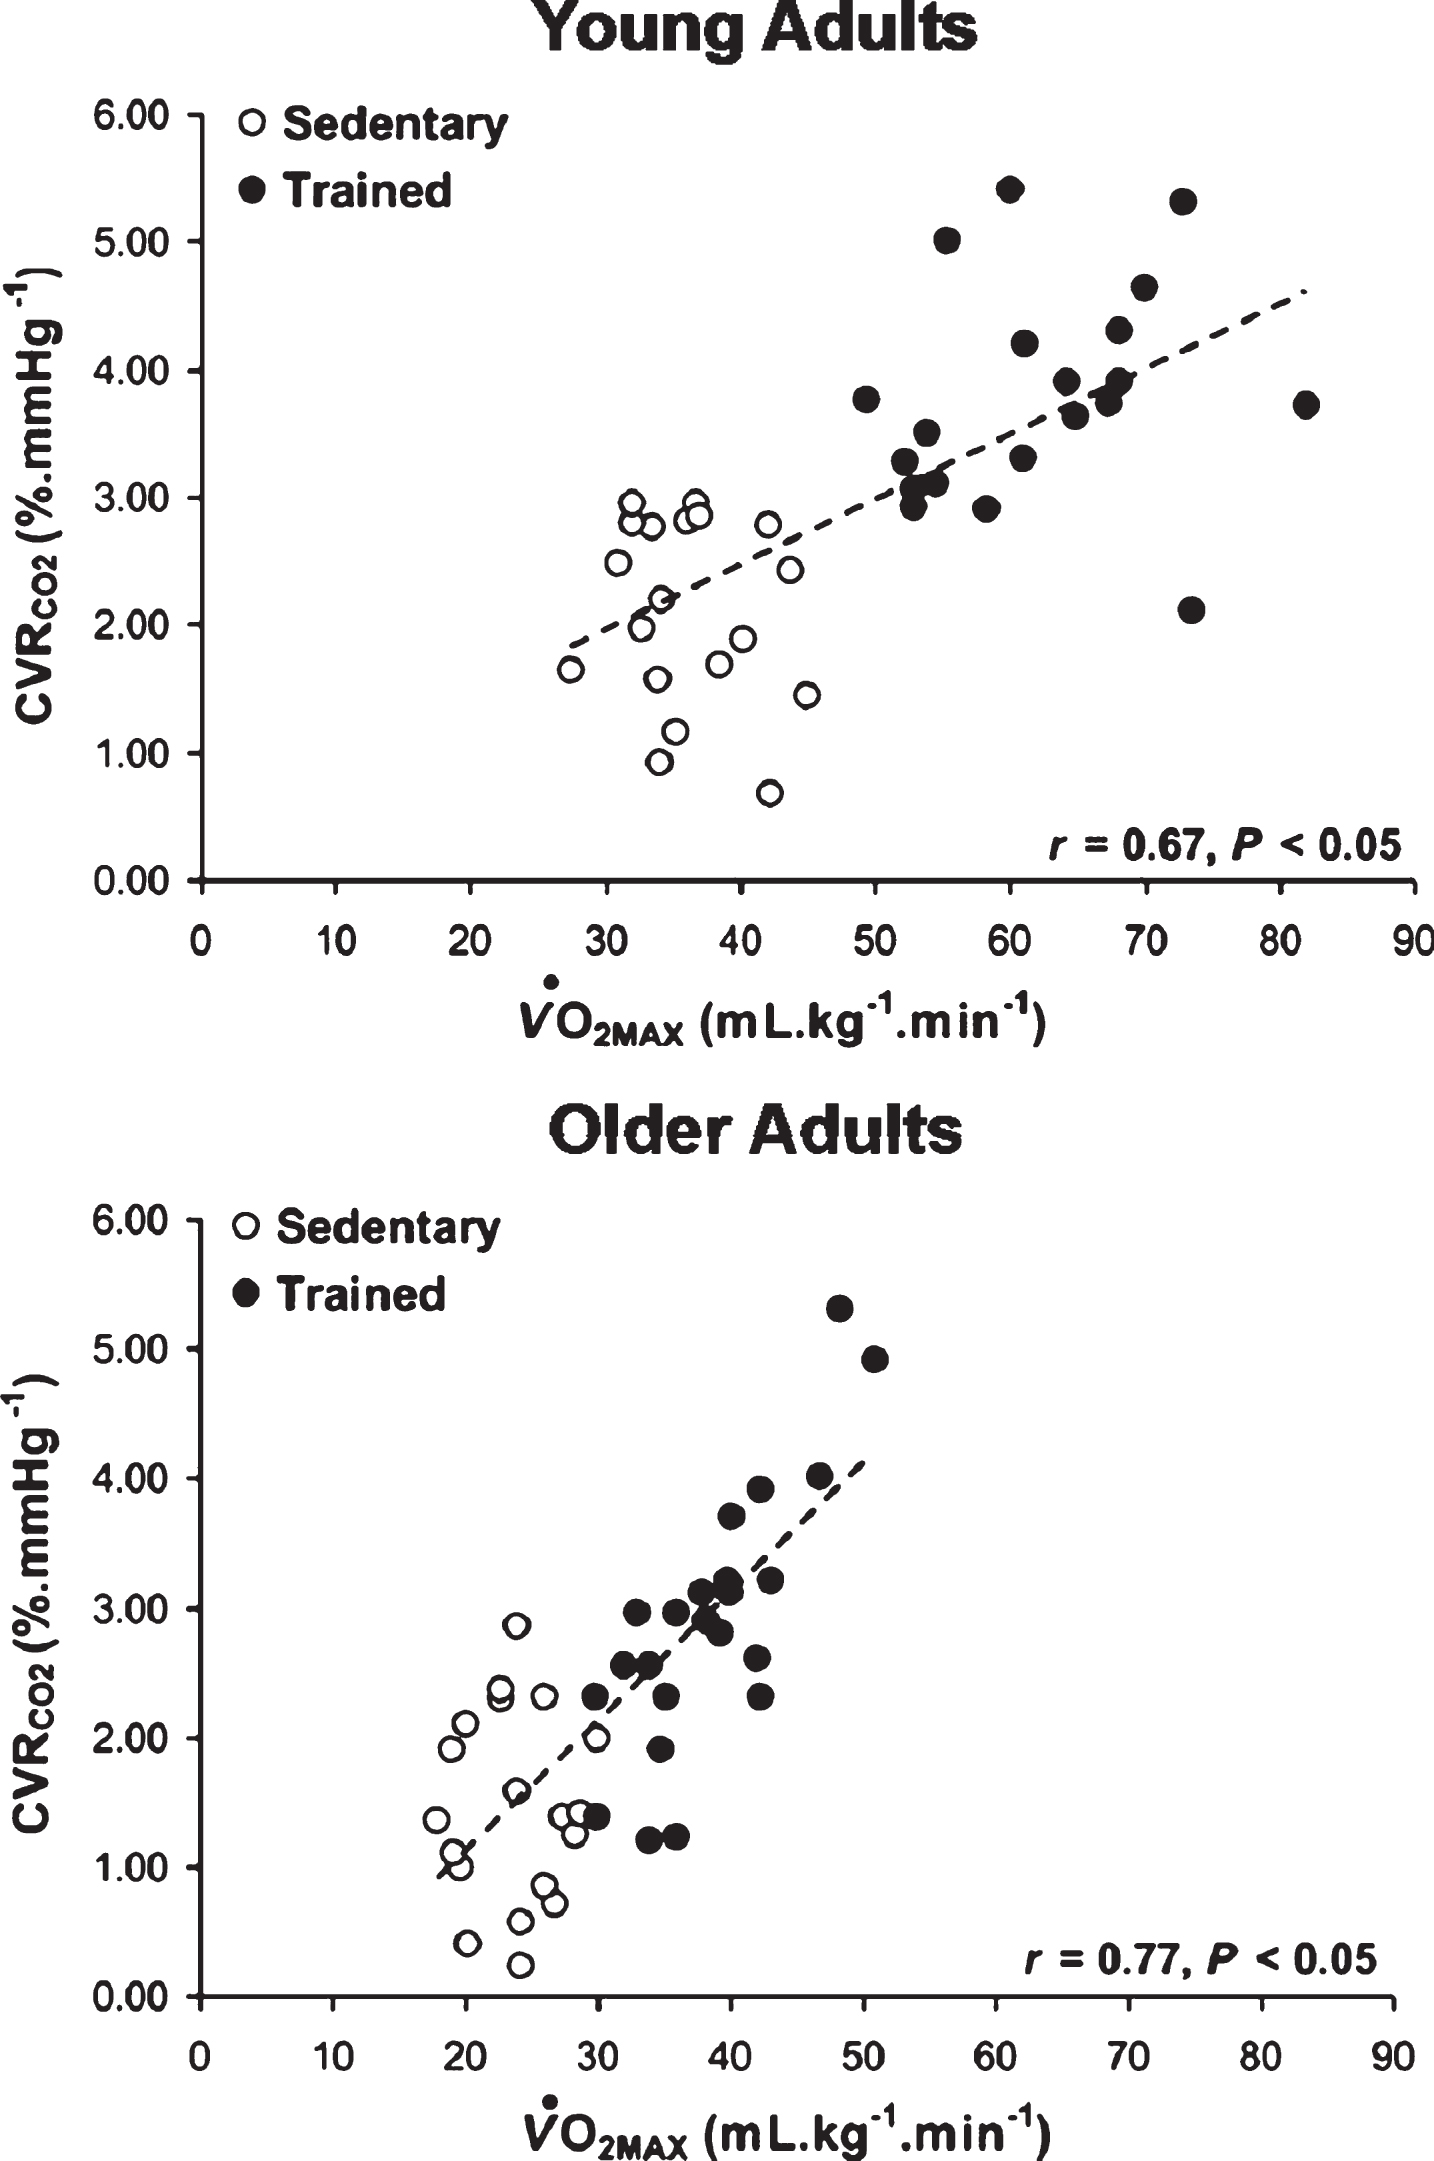 The relationship between cardiorespiratory fitness (VO2max) and cerebrovascular function (CVRCO2) in older adults as a function of exercise training status. CVRCO2 indicates cerebral vasodilator responses to carbon dioxide. Adapted with permission from Bailey, et al. [114].